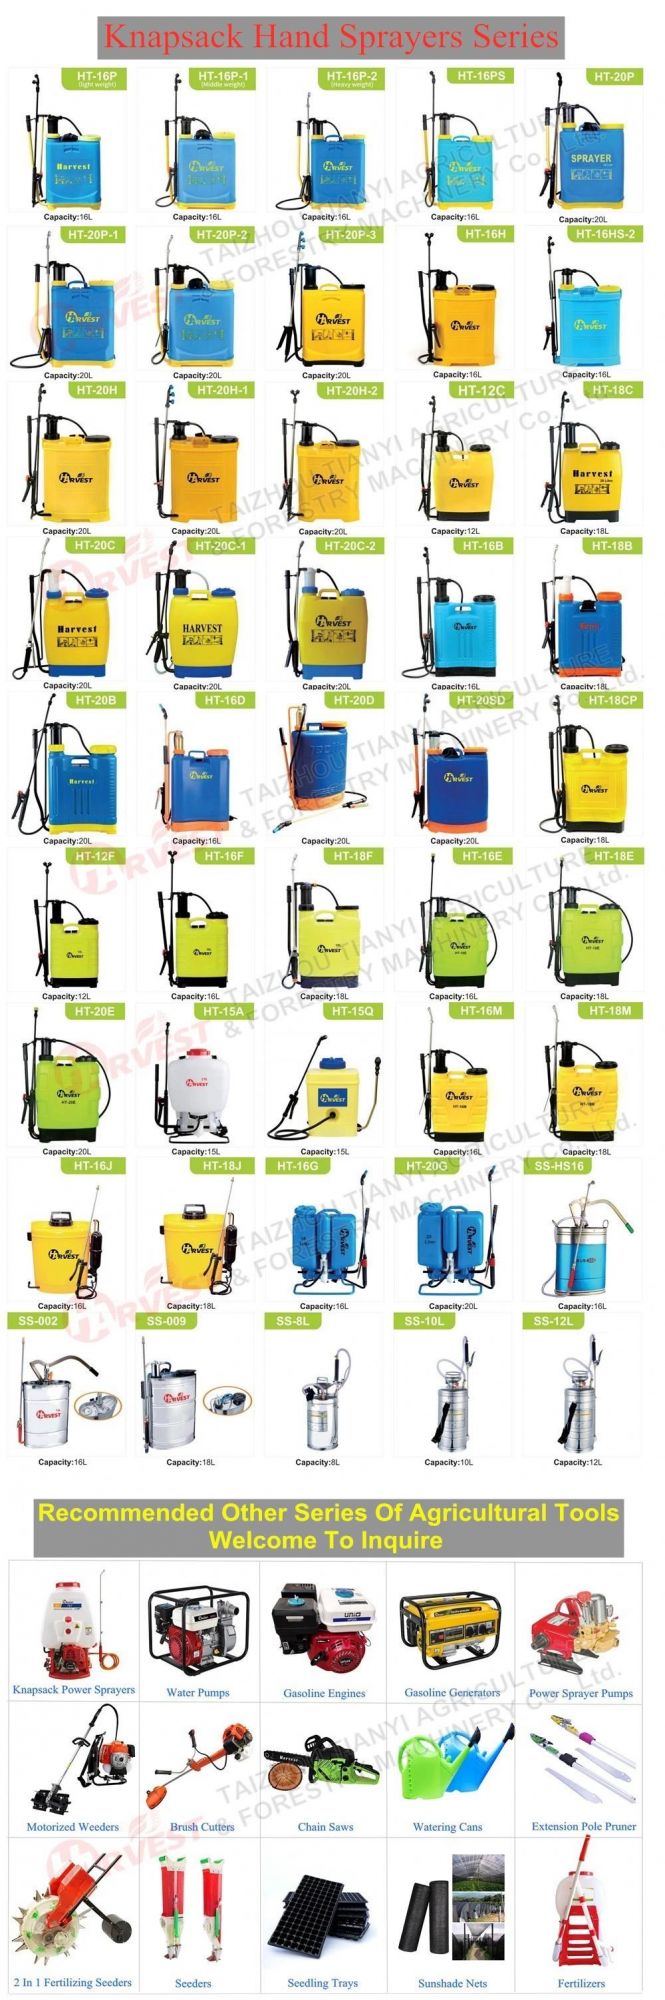 Quality Disinfection Agricultural Knapsack Malaysia Backpack Hand Sprayer (HT-16J)